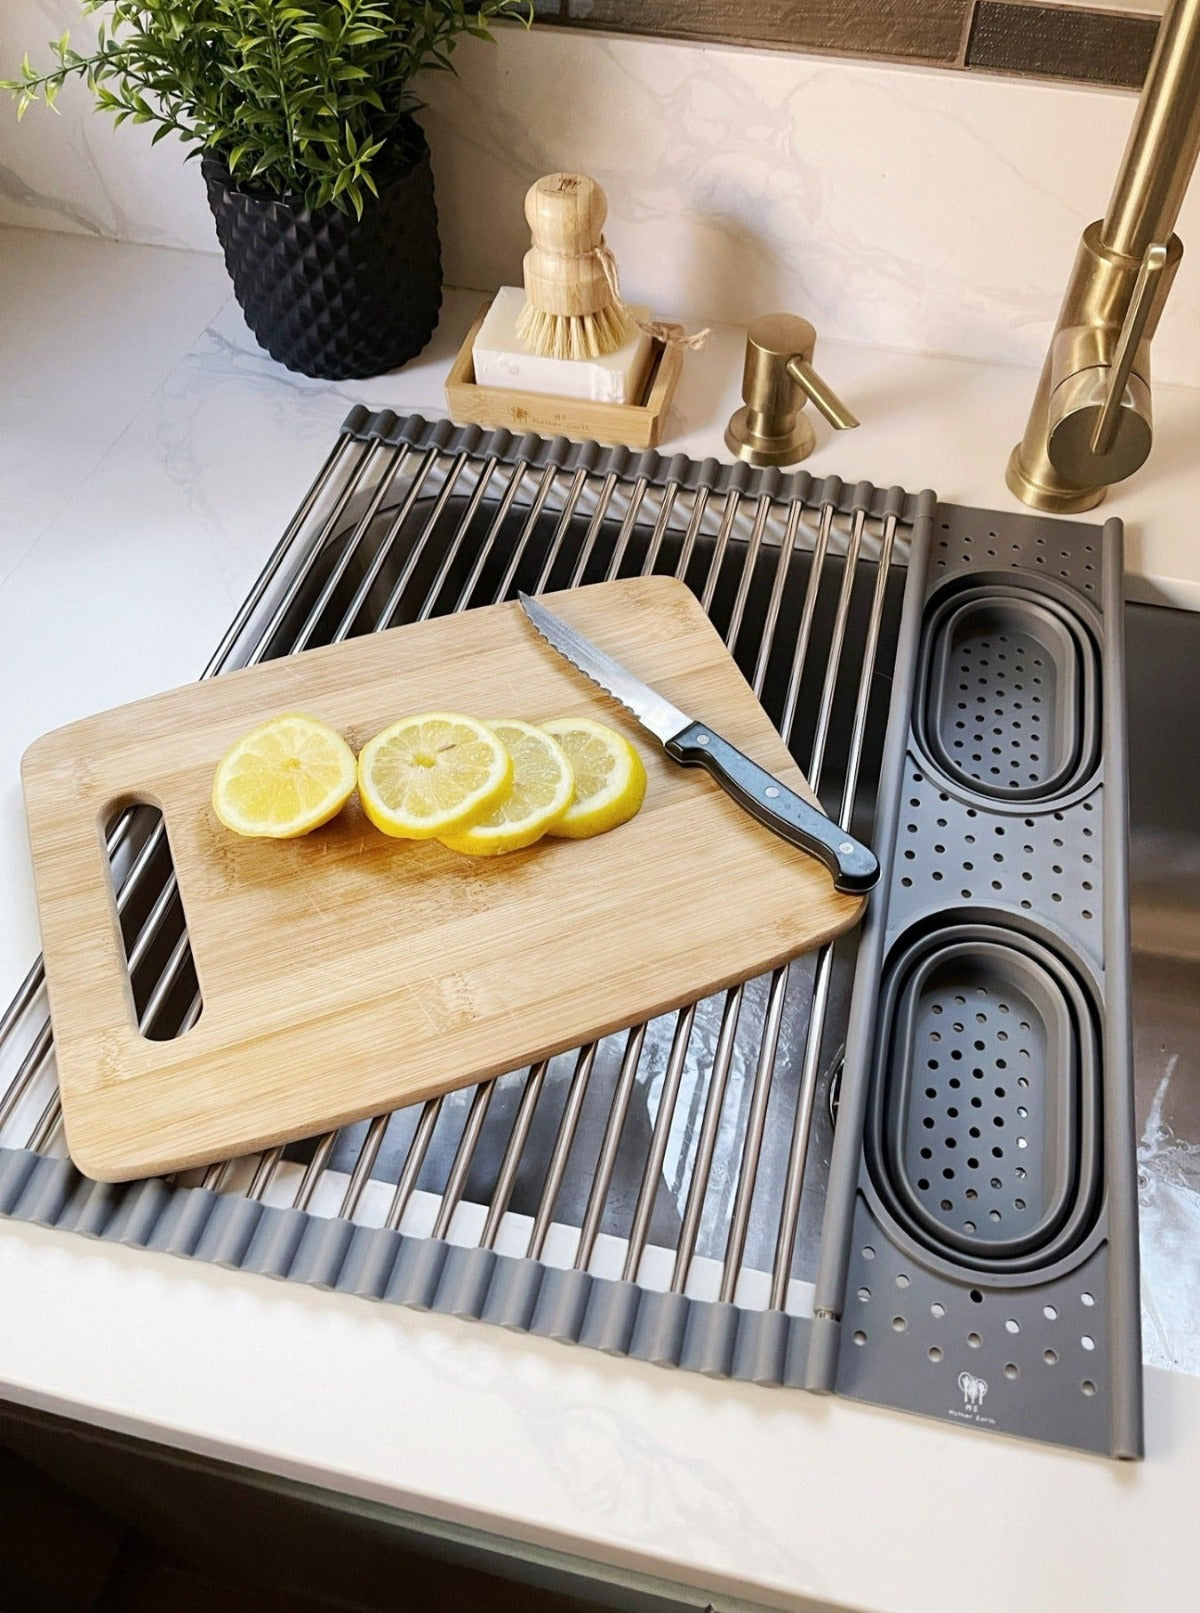 Dish Drying Rack - Stainless Steel And Silicone Dish Drying Mat Over The  Sink Foldable Drain Rack Multipurpose Dish Drainer